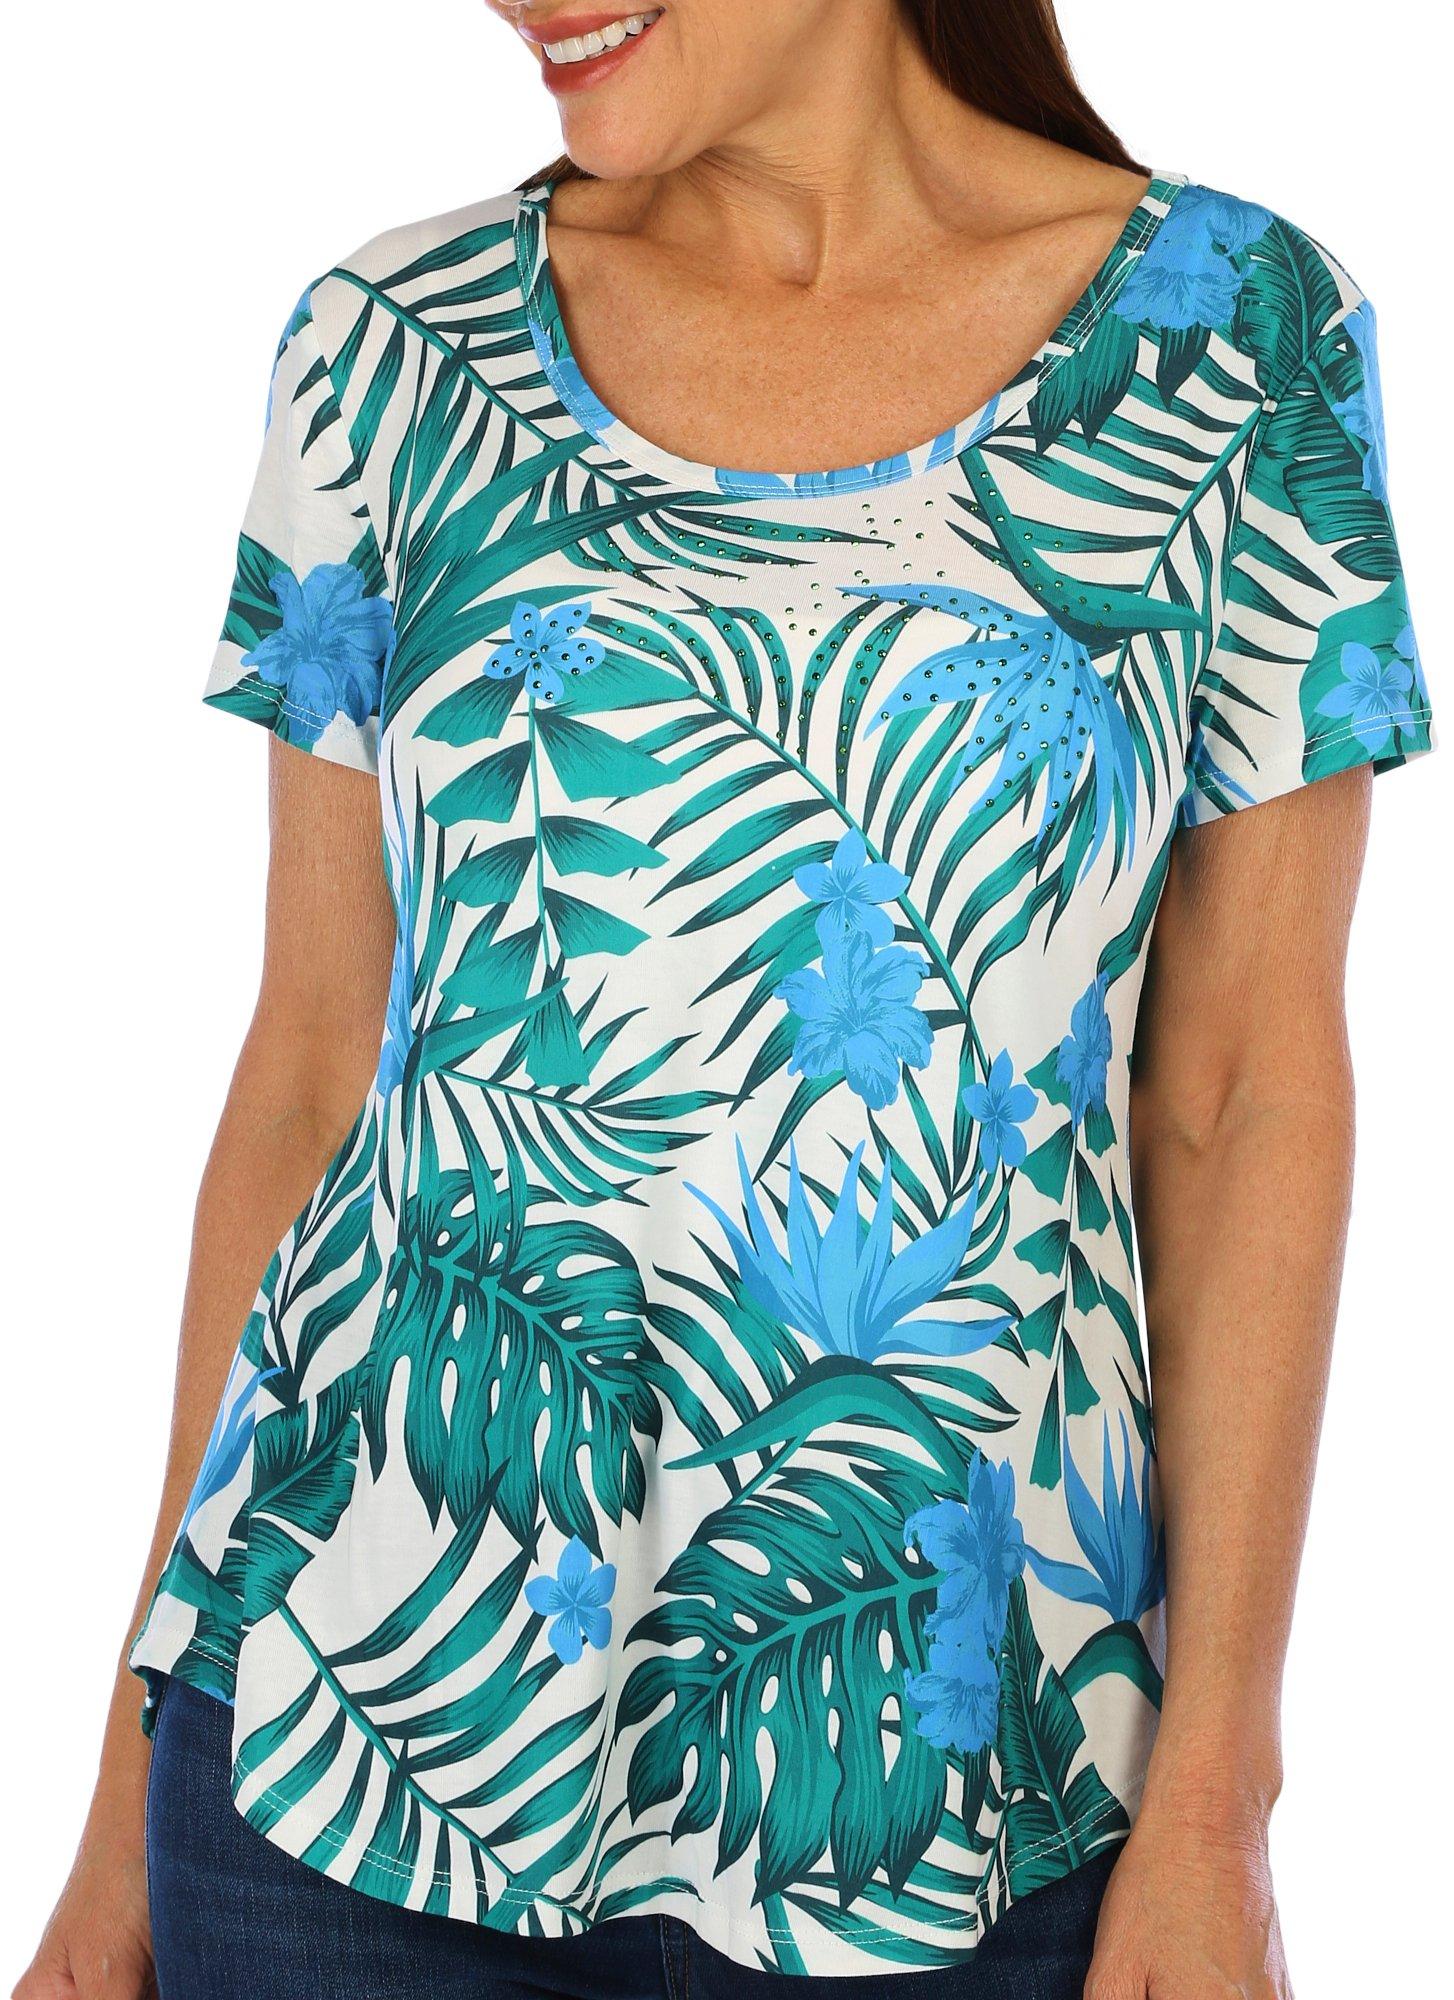 Coral Bay Womens Short Sleeve Tropical Embellished Top